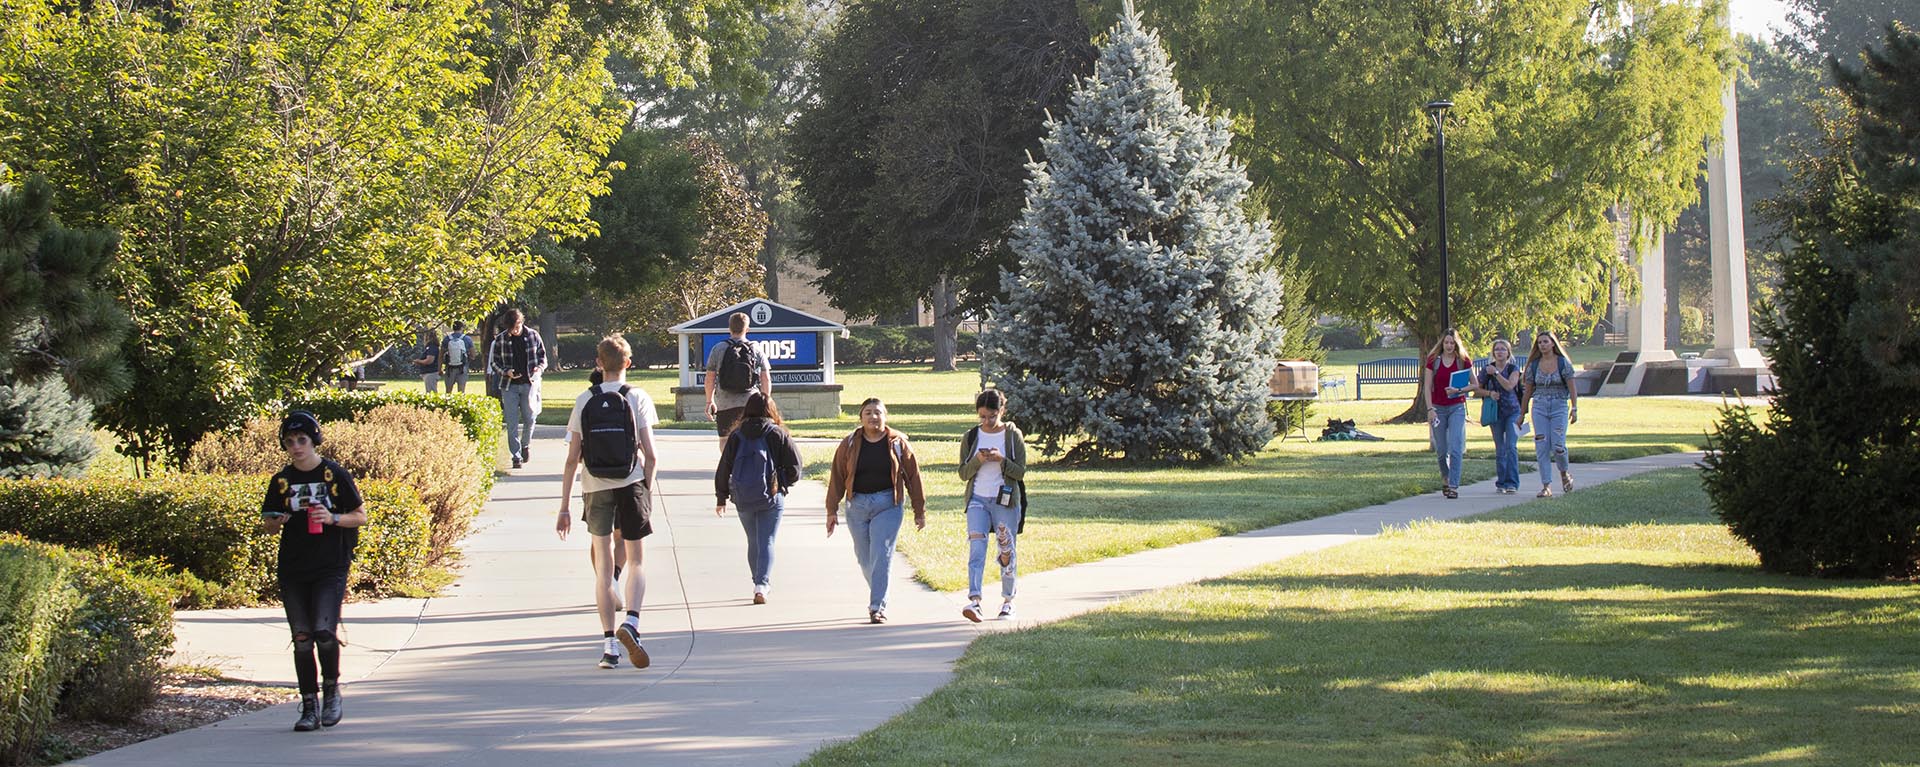 Students walk to class on campus on a spring day.